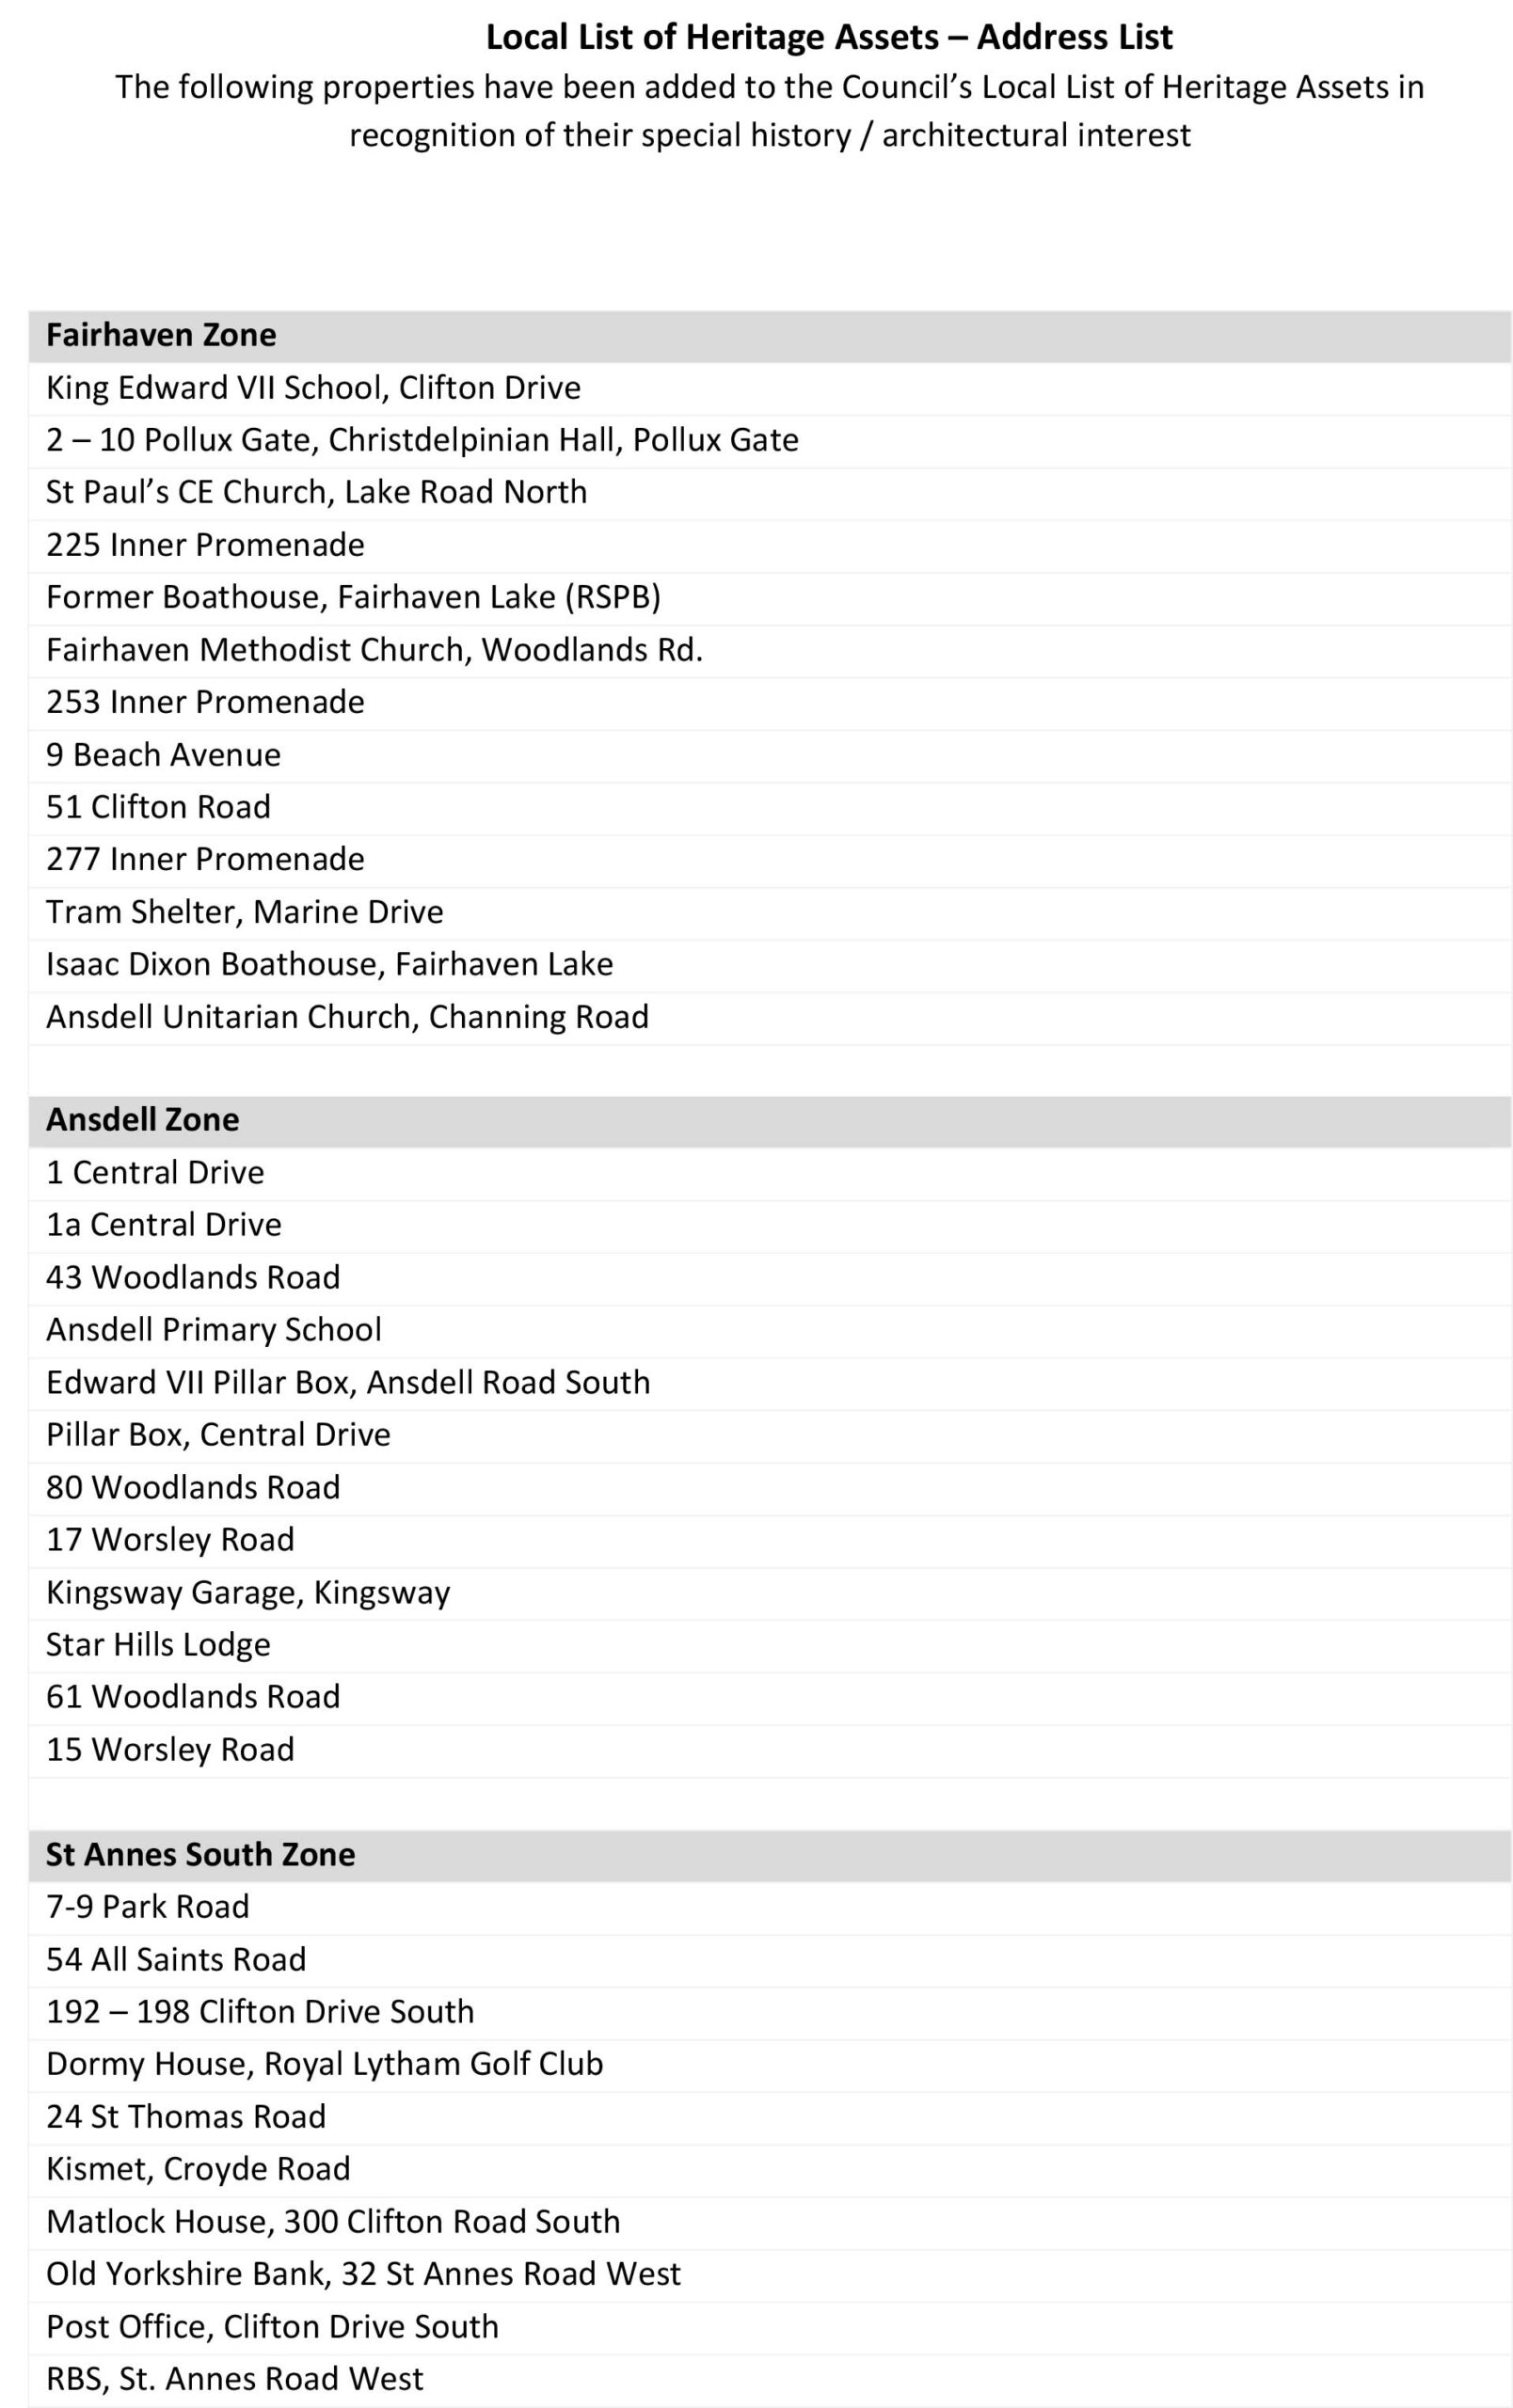 Local List of Heritage Assets - Page 1